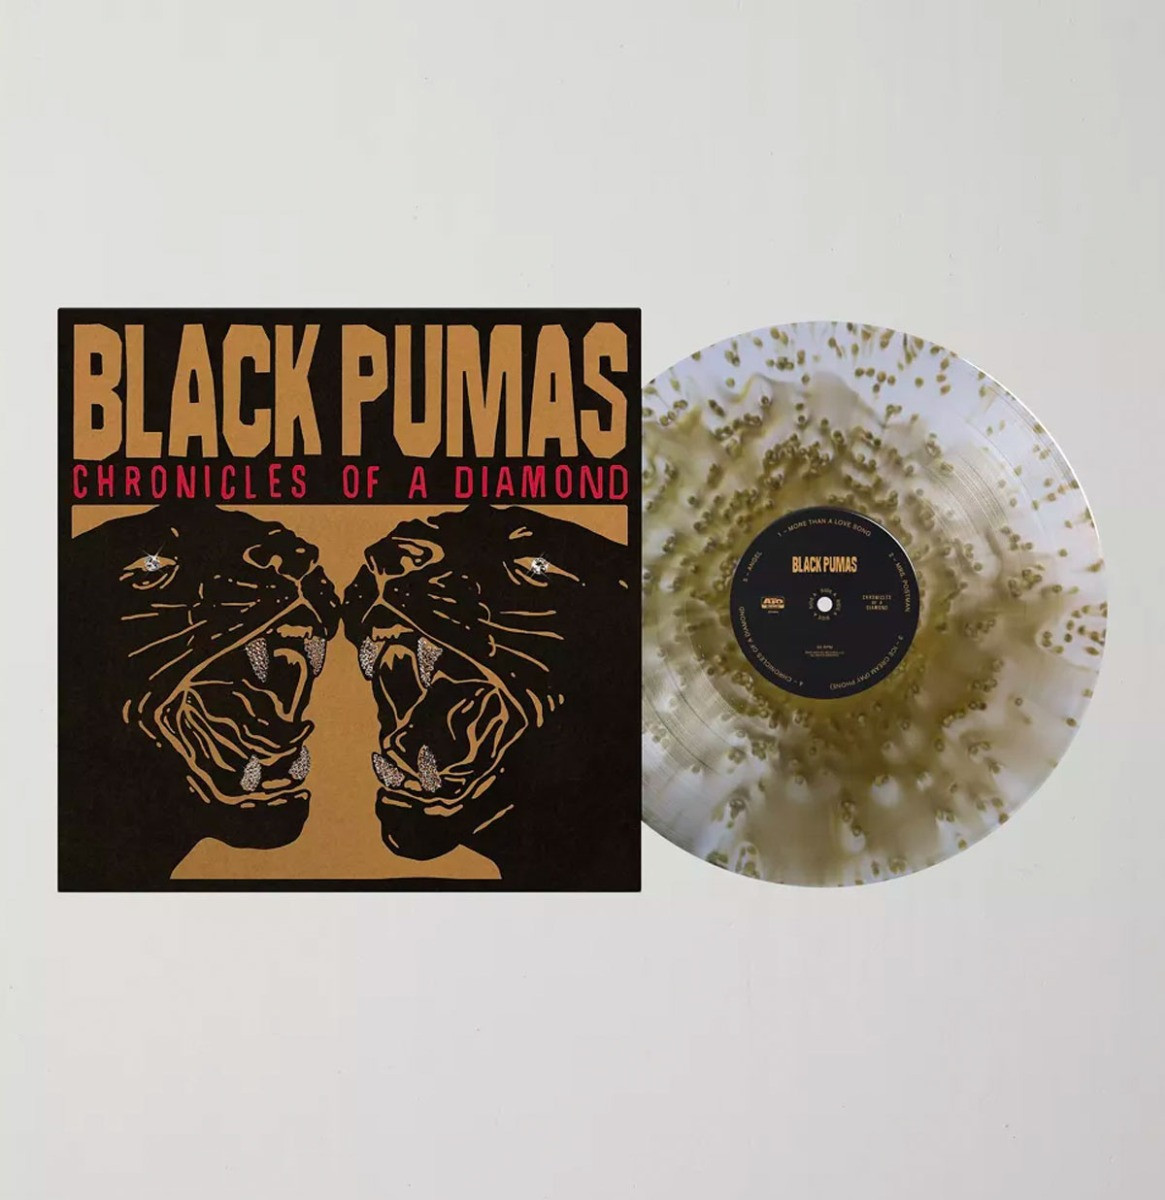 Black Pumas - Chronicles Of A Diamond (Coloured Vinyl) (Urban Outfitters Exclusive) LP